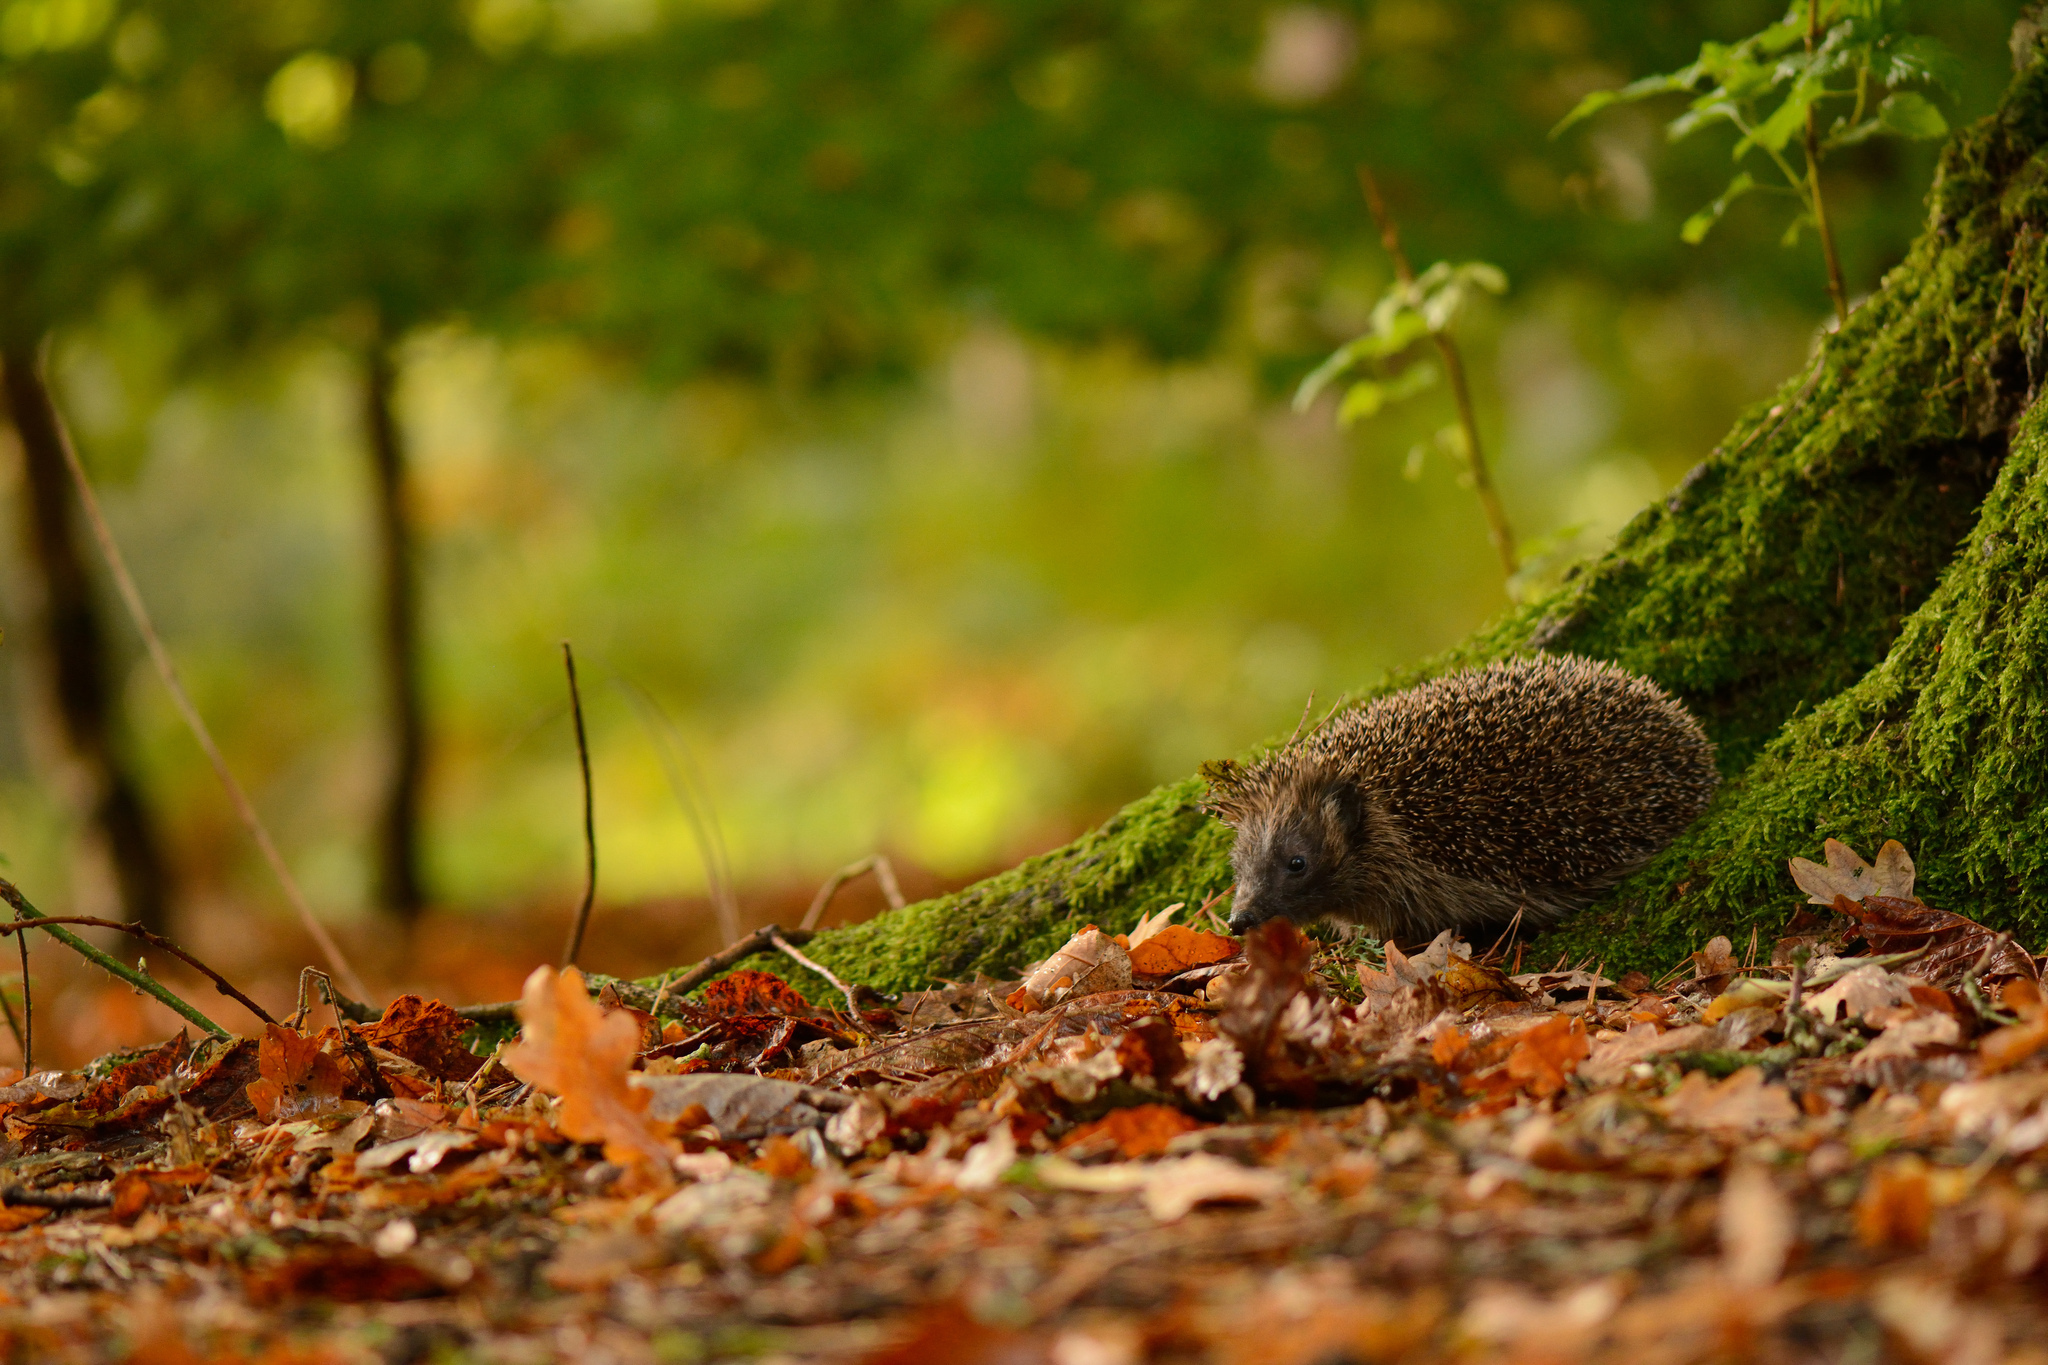 60848 download wallpaper leaves, animal, animals, trees, autumn, moss, hedgehog screensavers and pictures for free